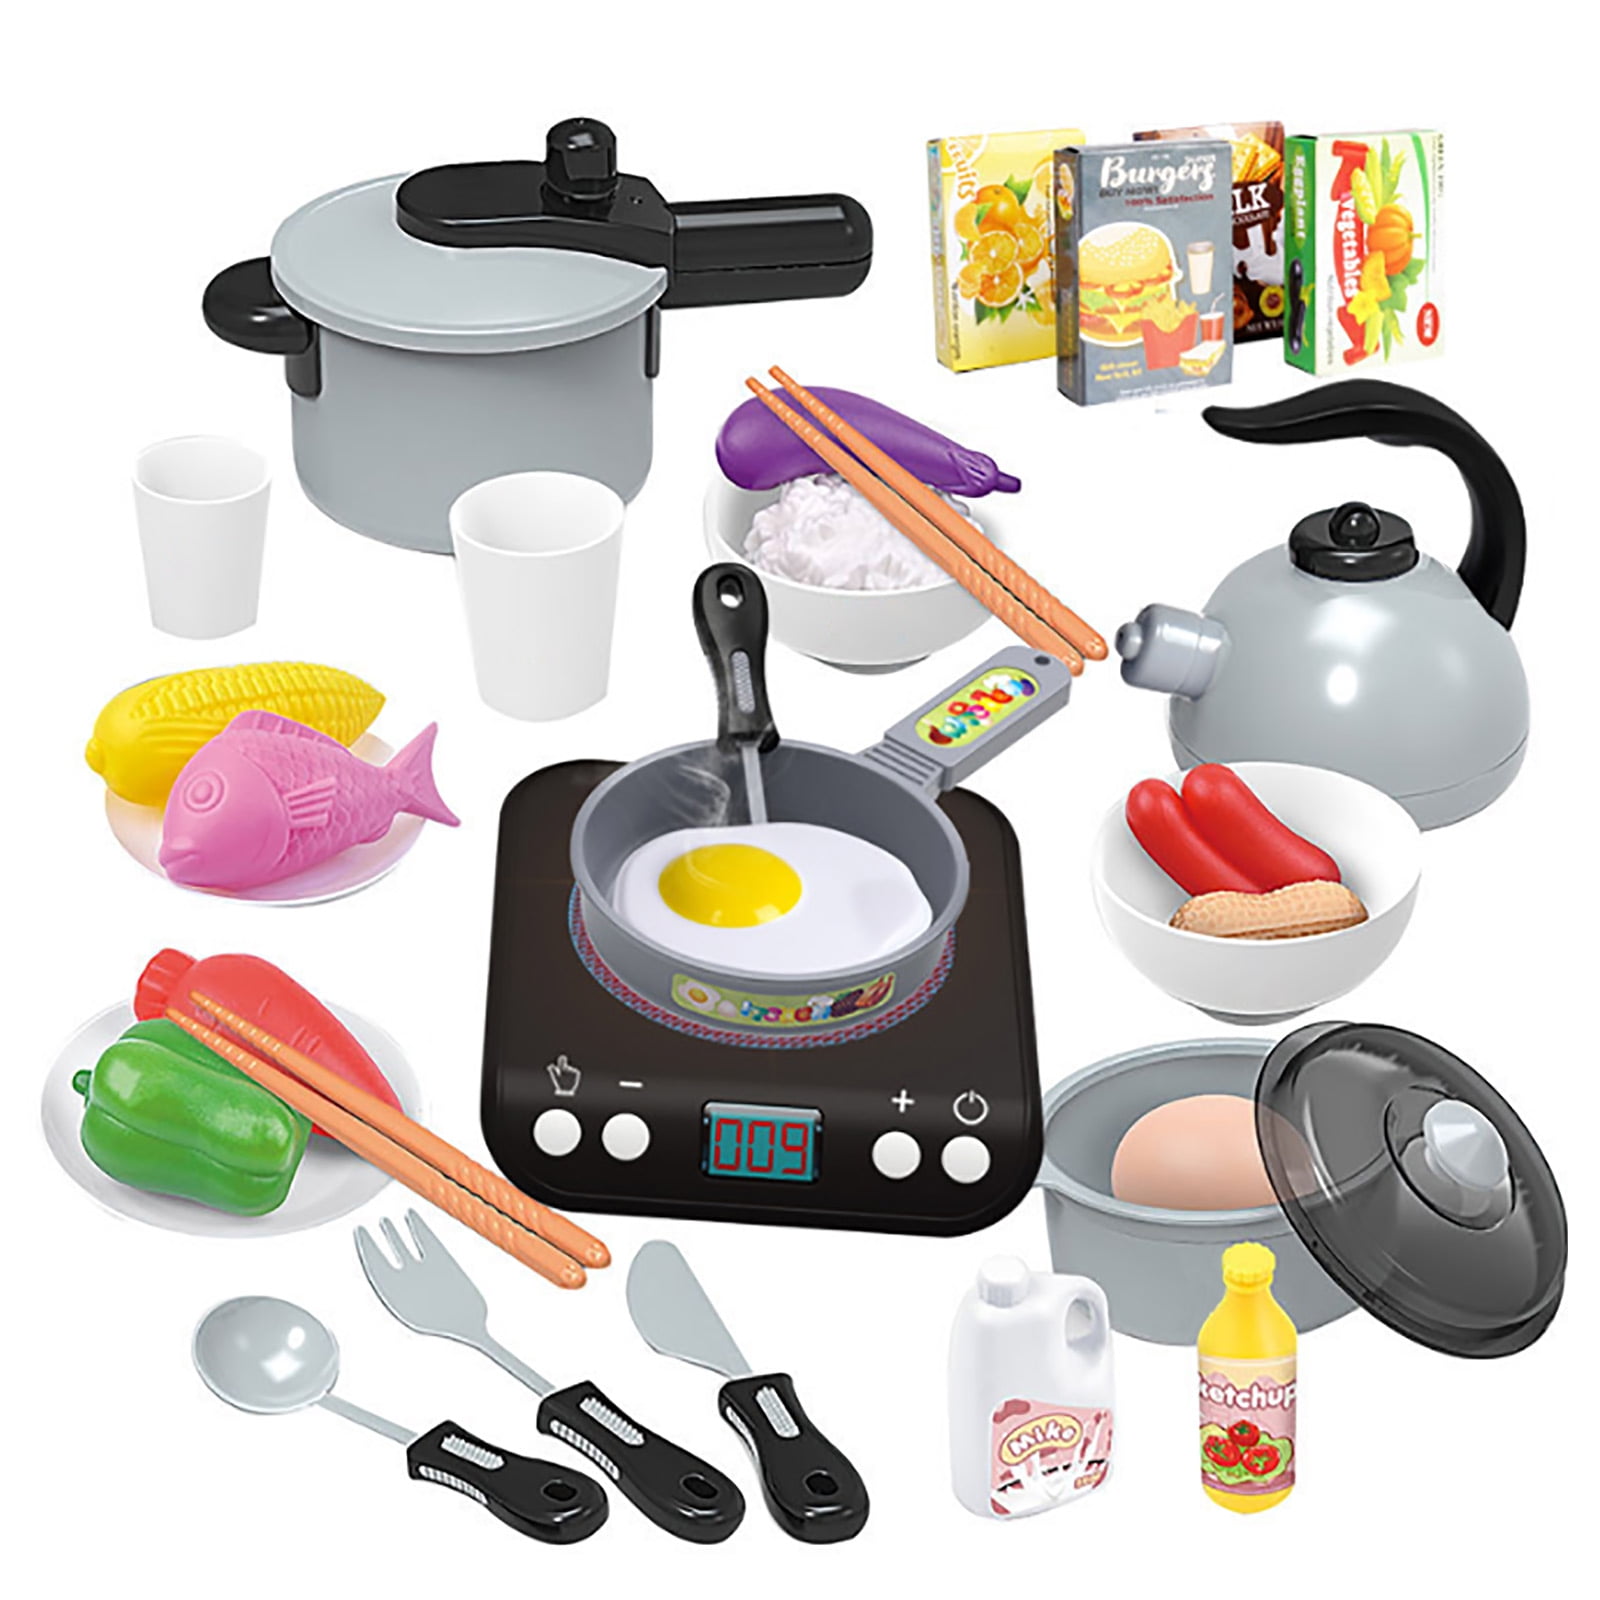 Kids Cooker Mini Kitchen Set Elementary Educational Toys Cooking